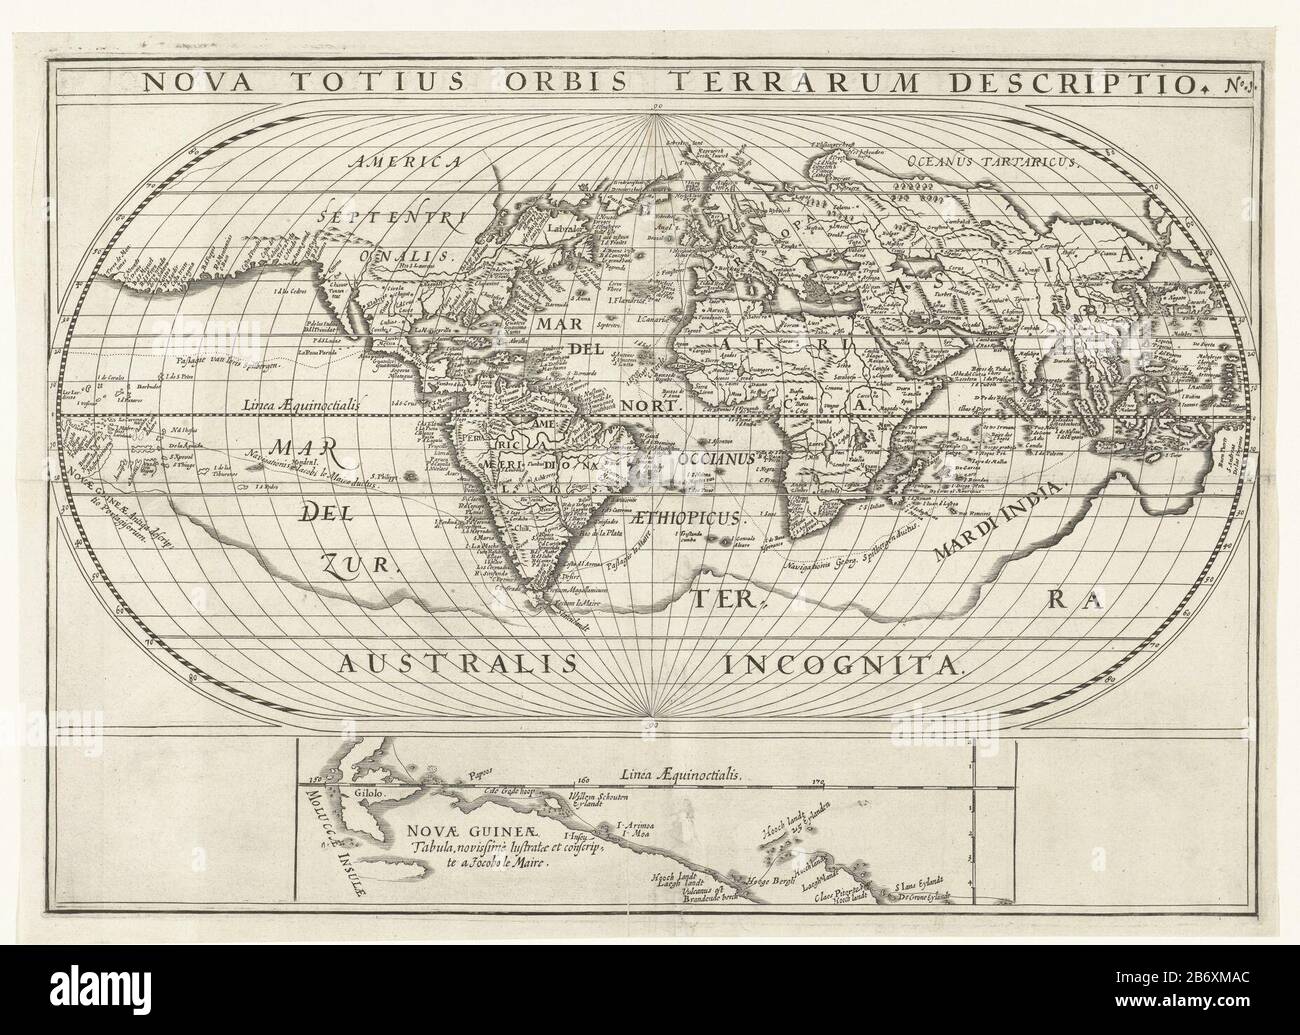 Kaart van de wereld met de reizen van Joris van Spilbergen en Jacob le Maire om de wereld, 1614-1617 Nova Totius Orbis Terrarum Descriptio (titel op object) Map of the world Where: are indicated on the travel of Joris van Spilbergen and Jacob le Maire around the world, from 1614 to 1617. Down a detail of the north coast of New Guinea. Part of the illustrations in the report of the trip Joris van Spilbergen around the world, 1614-1617, No. 1. Manufacturer : print maker: anonymous location manufacture: Northern Netherlands Date: 1617-1619 and / or 1646 Physical characteristics: engra material: p Stock Photo